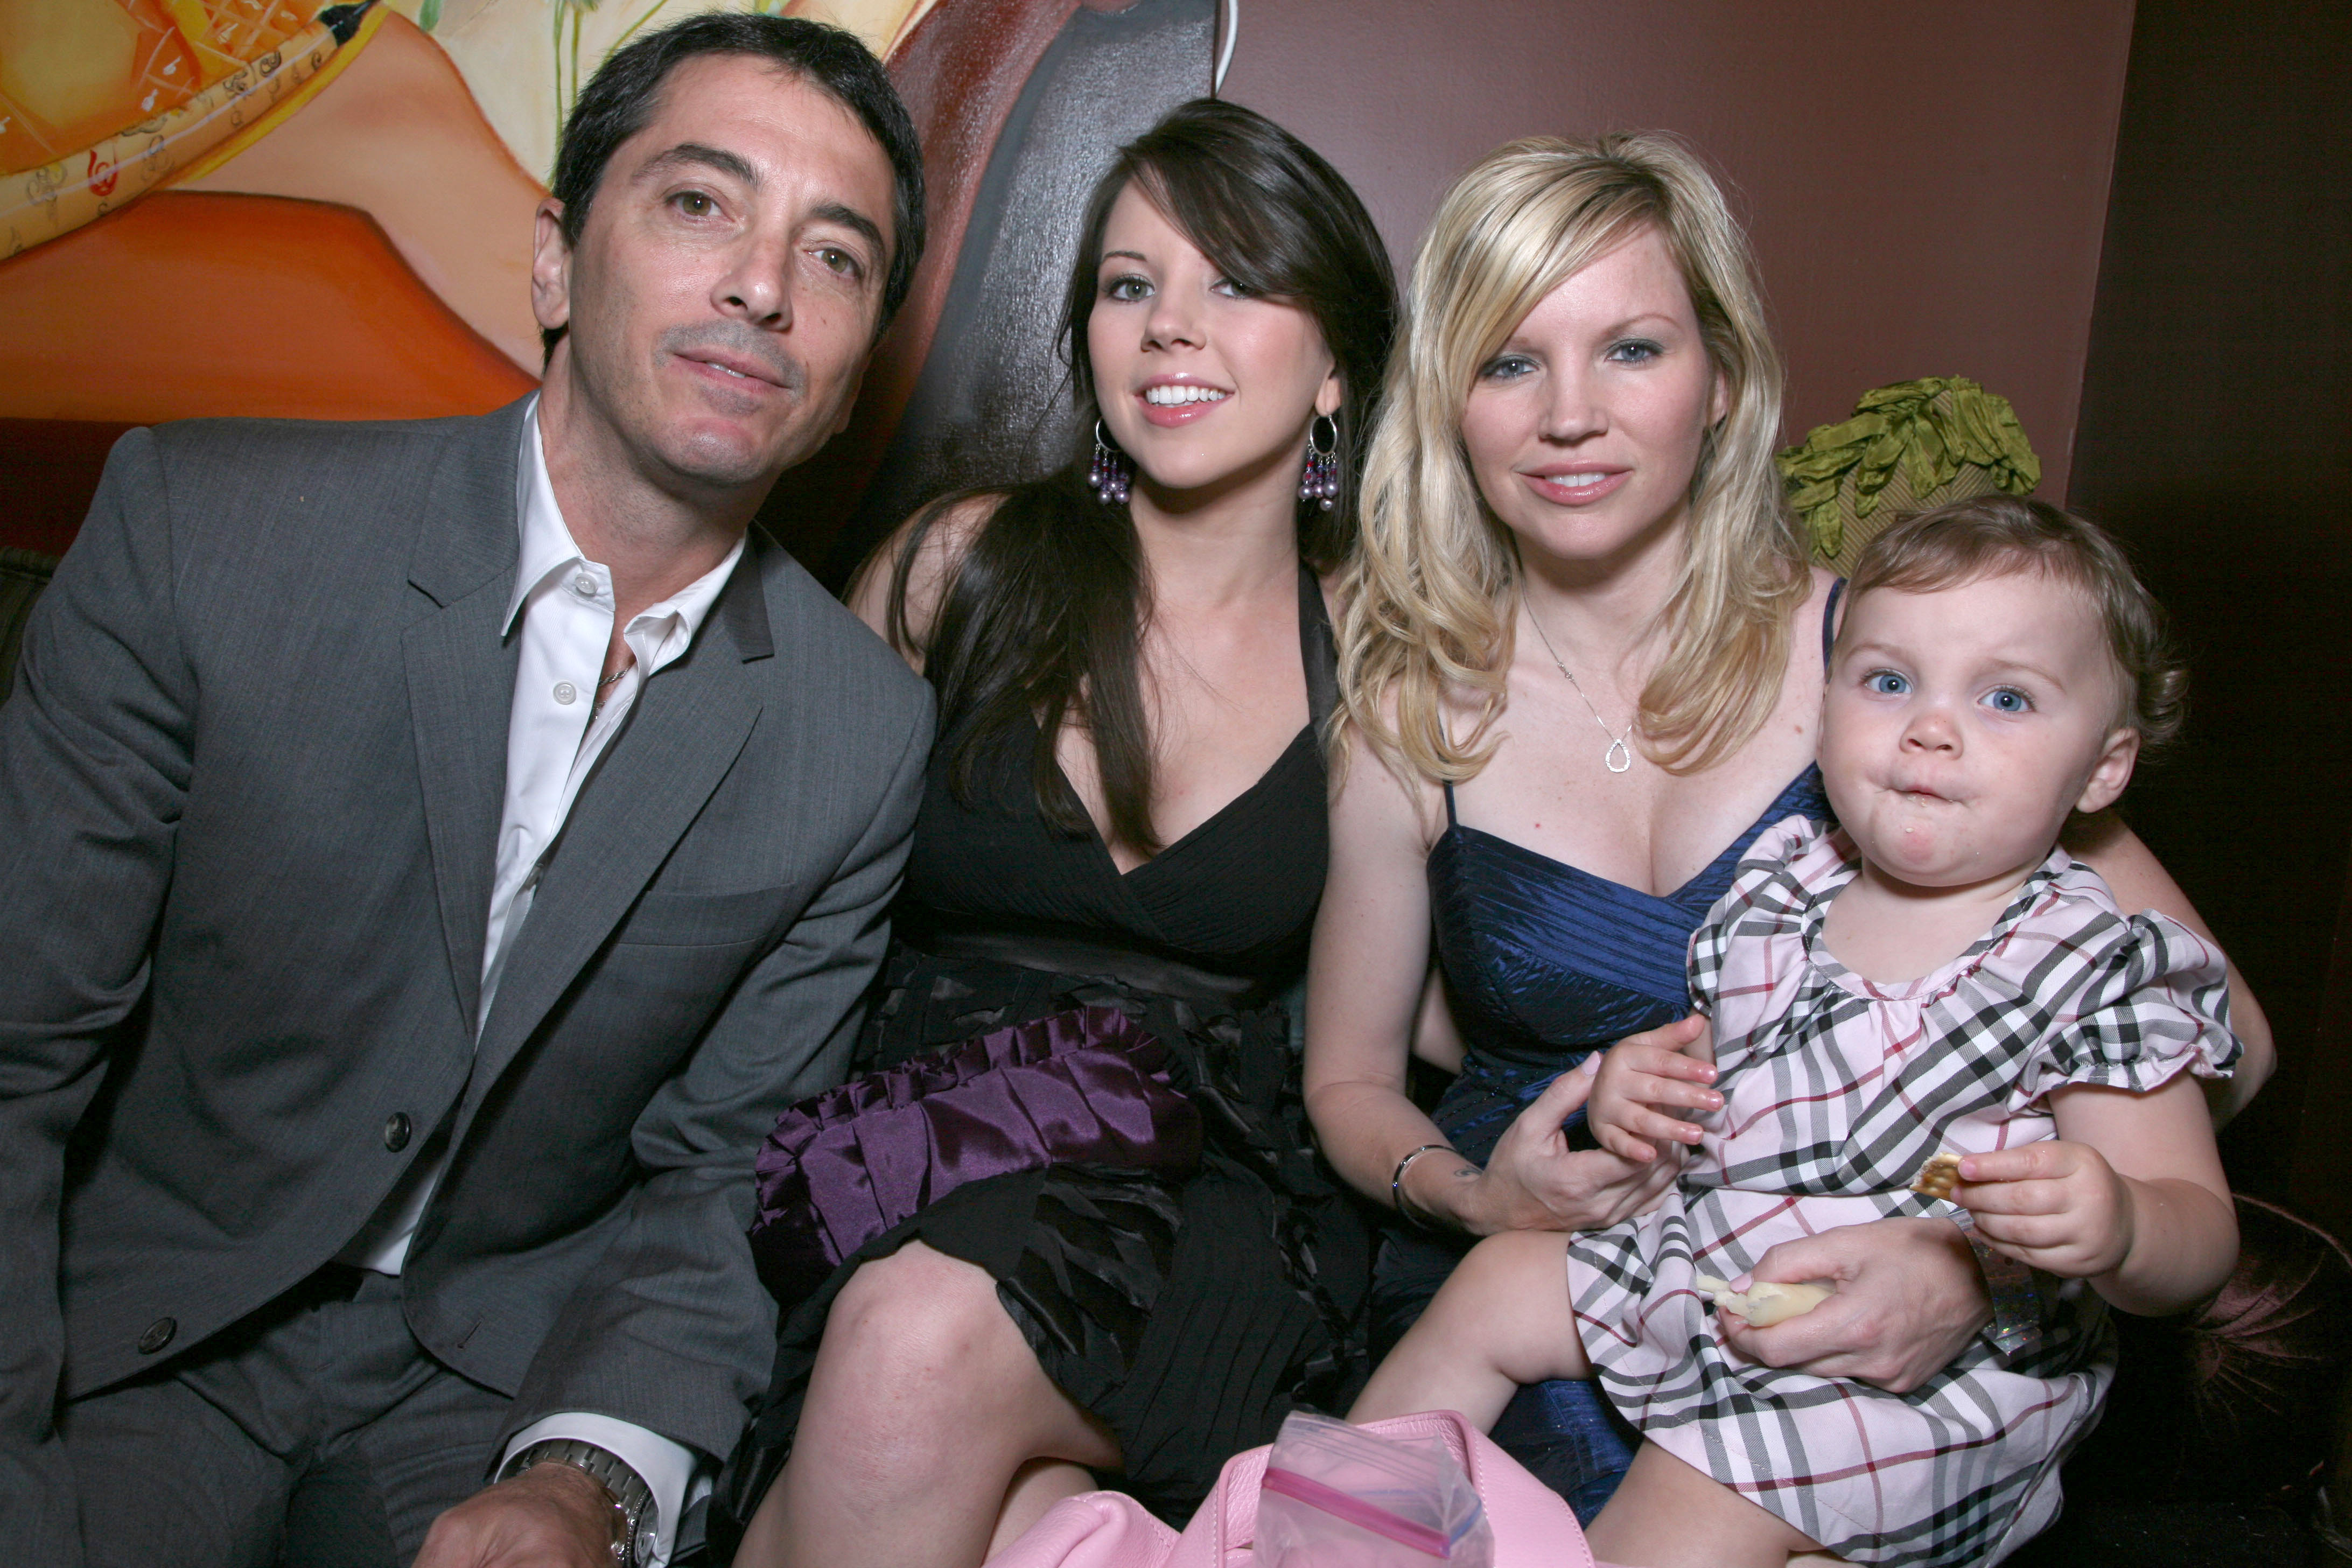 Renee Sloan, actor Scott Baio, Bailey Baio and Kalyn Sloan attend the Children's Hospital Los Angeles Benefit "The Bash" at Crustacean on May 17, 2009 in Beverly Hills, California. | Source: Getty Images